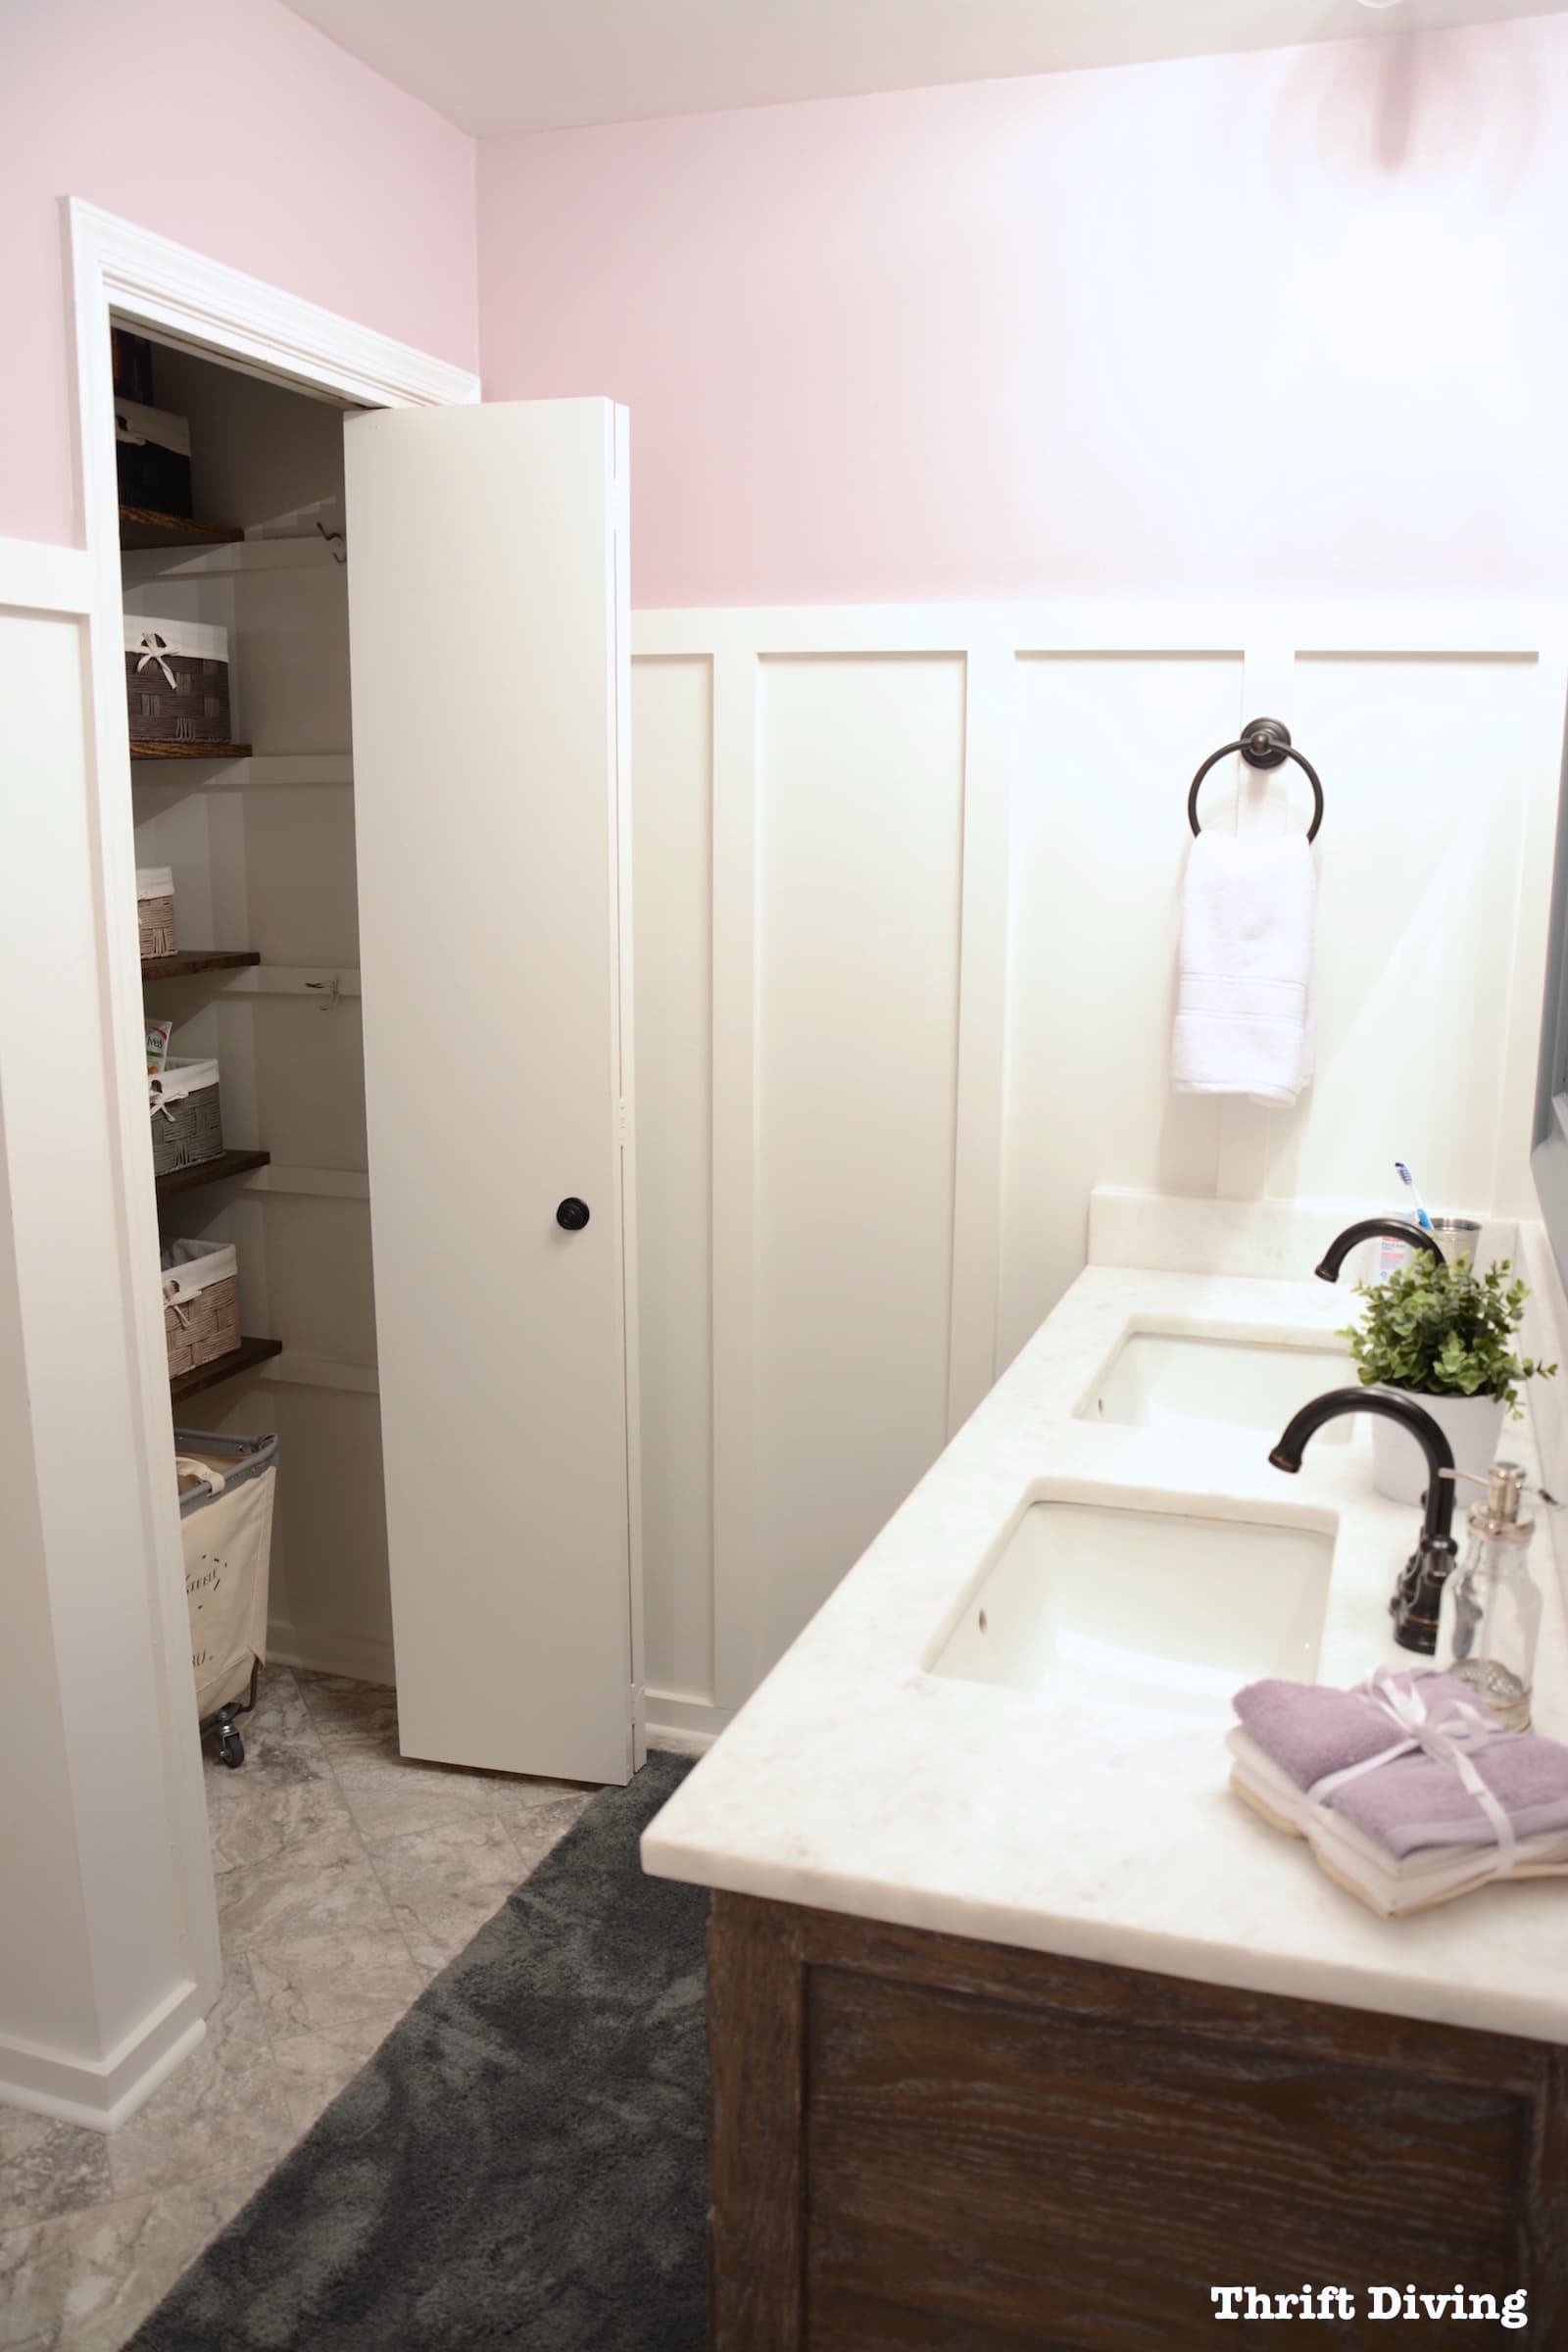 Pretty lavender master bathroom makeover - Behr Mulberry Stain wall color and new closet shelves. - Thrift Diving